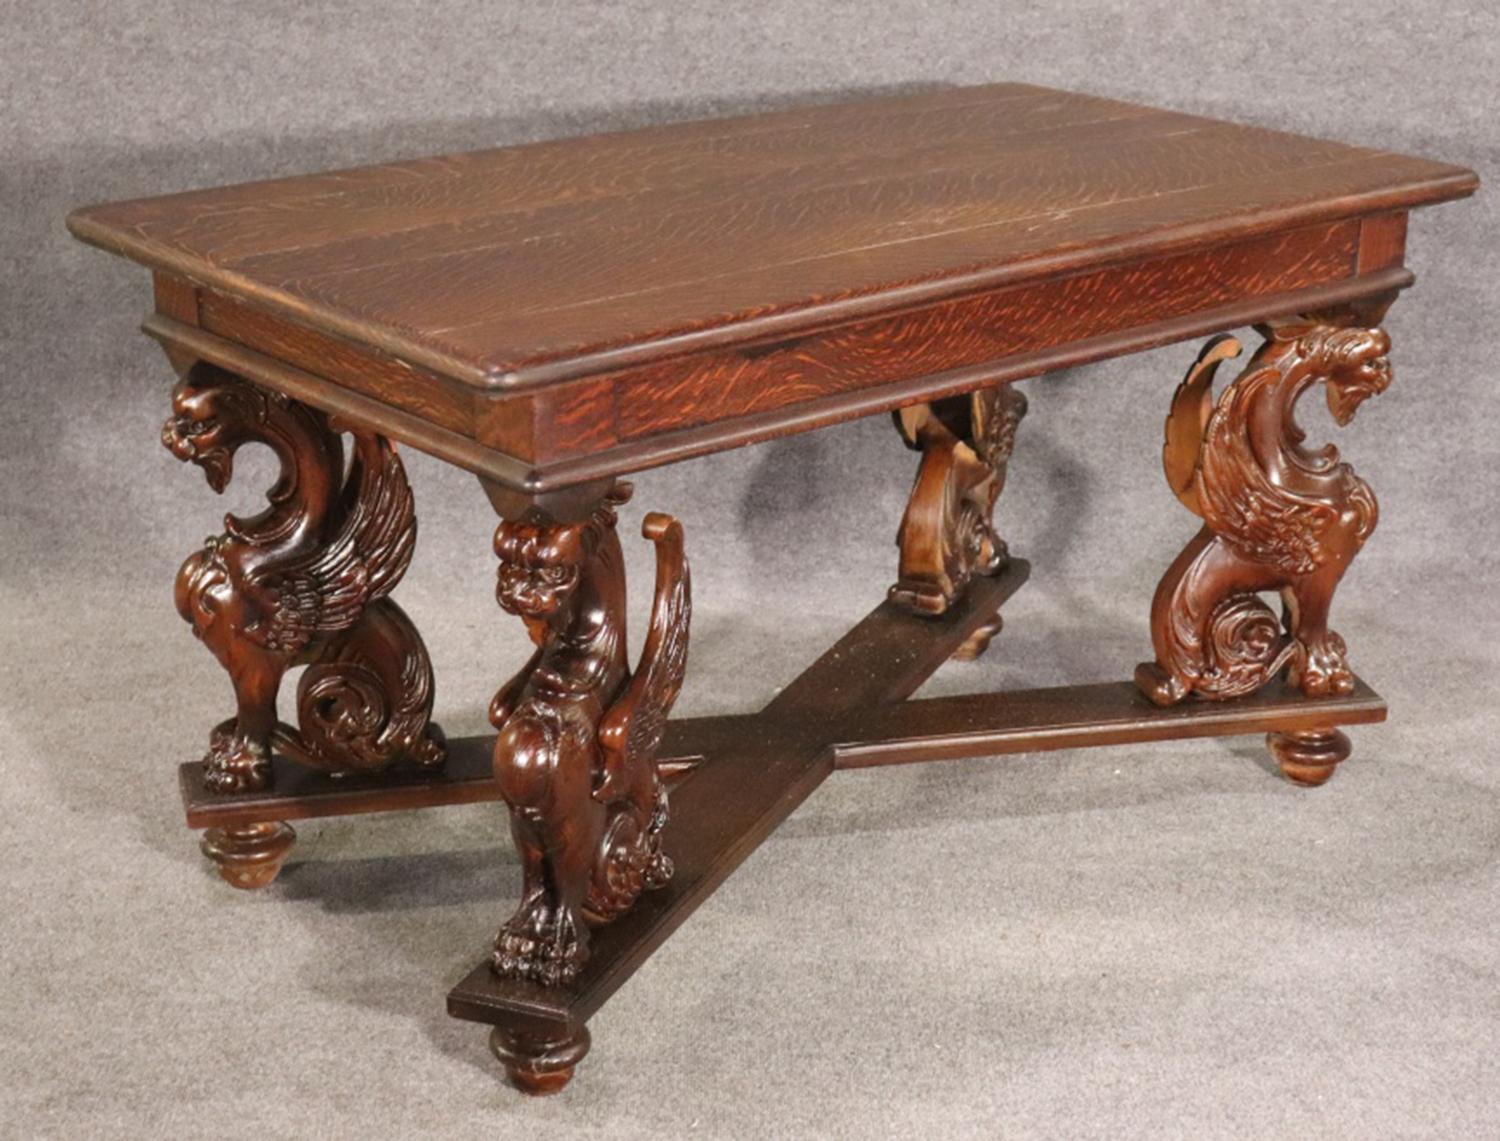 This is a gorgeous oak griffin writing table with gorgeous tiger oak gorgeous design and proportions. Could also be used as a center table in a foyer. Carved. Griffin detail. 30 1/4